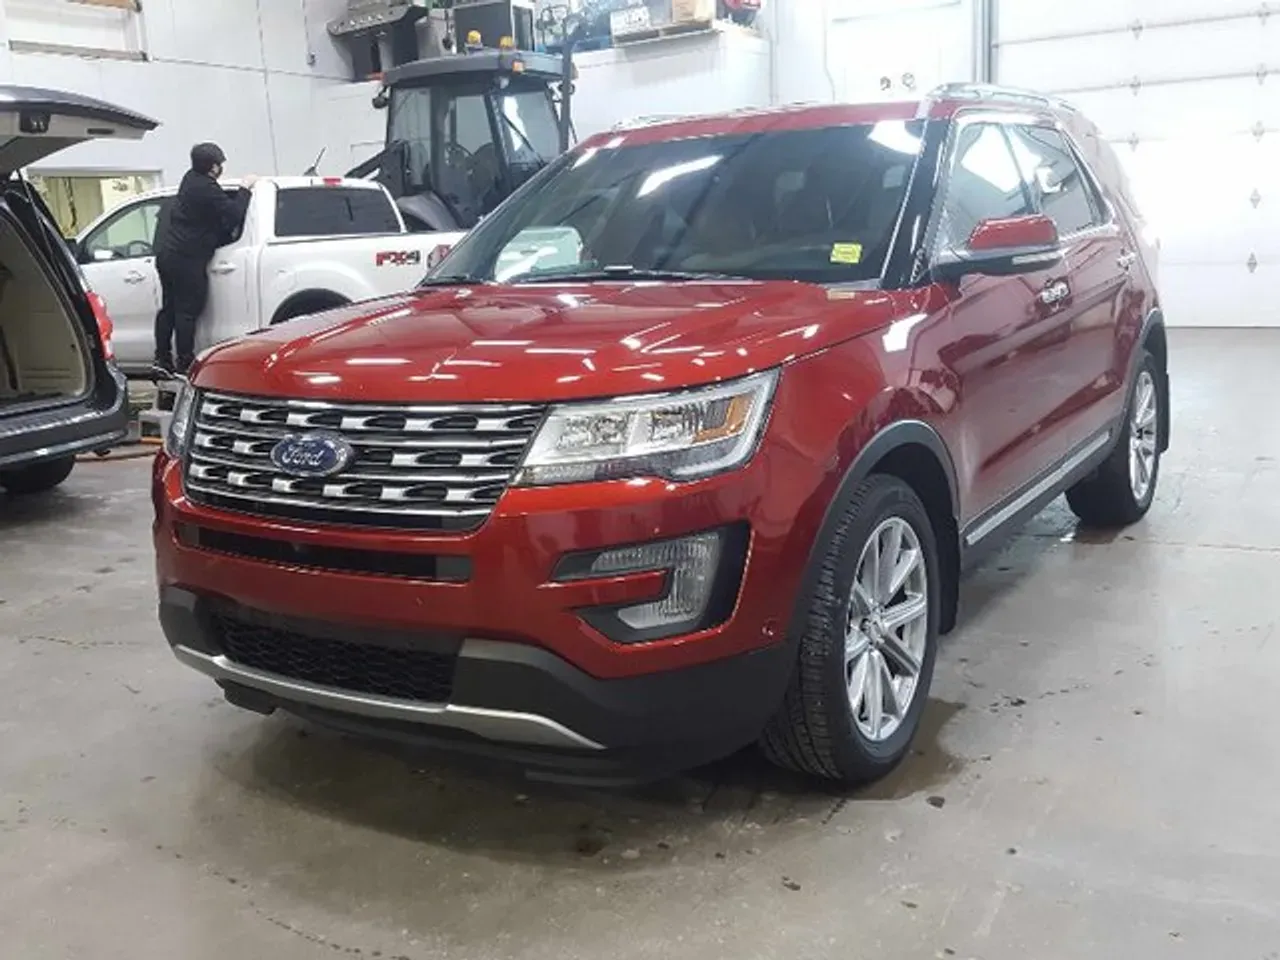 17 Ford Explorer For Sale Heyauto